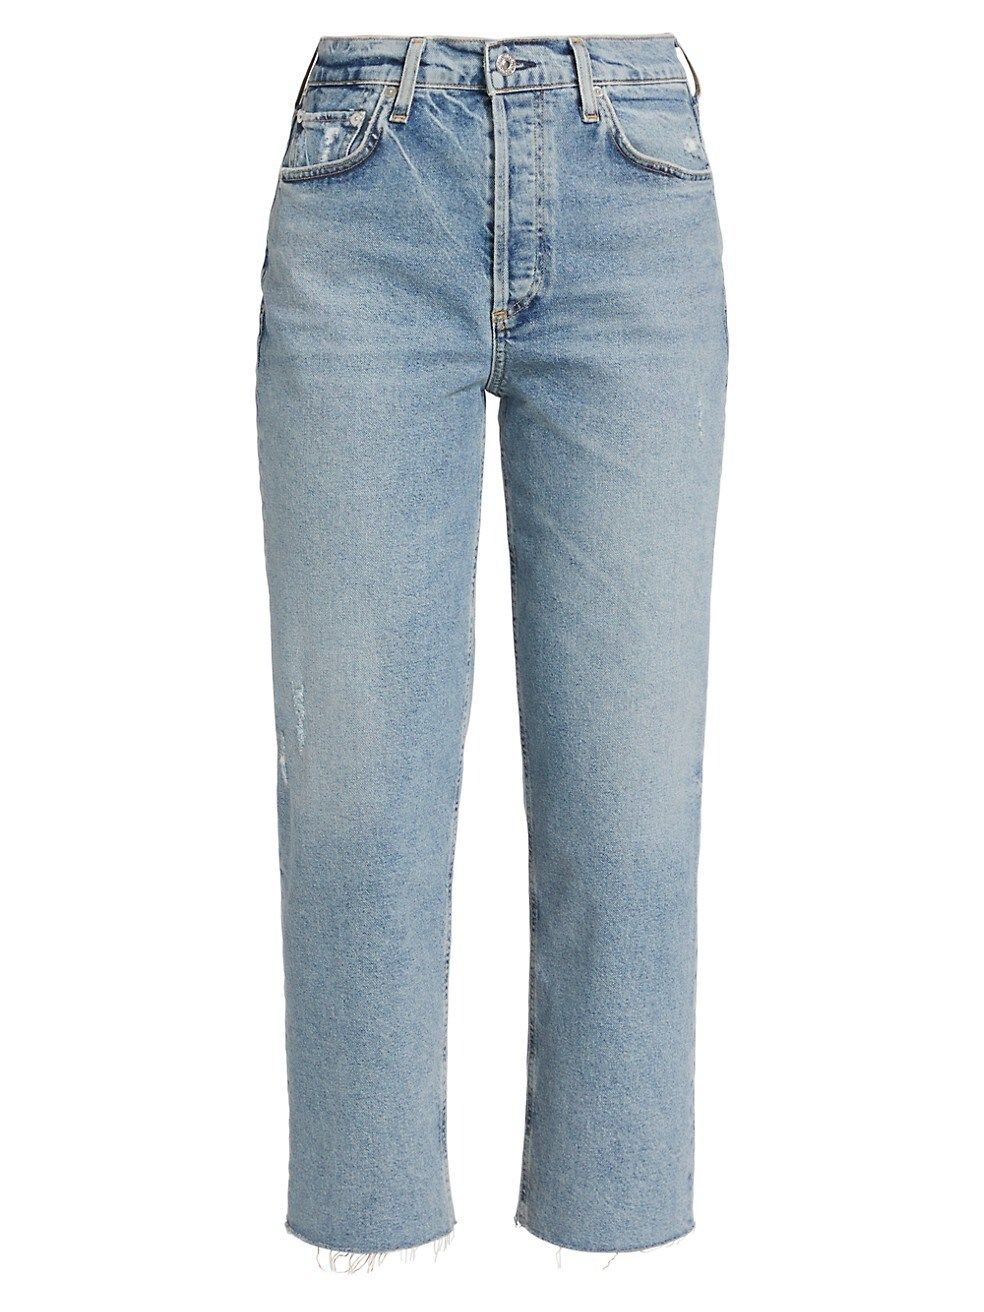 Citizens of Humanity Florence Straight Fit Jeans | Saks Fifth Avenue